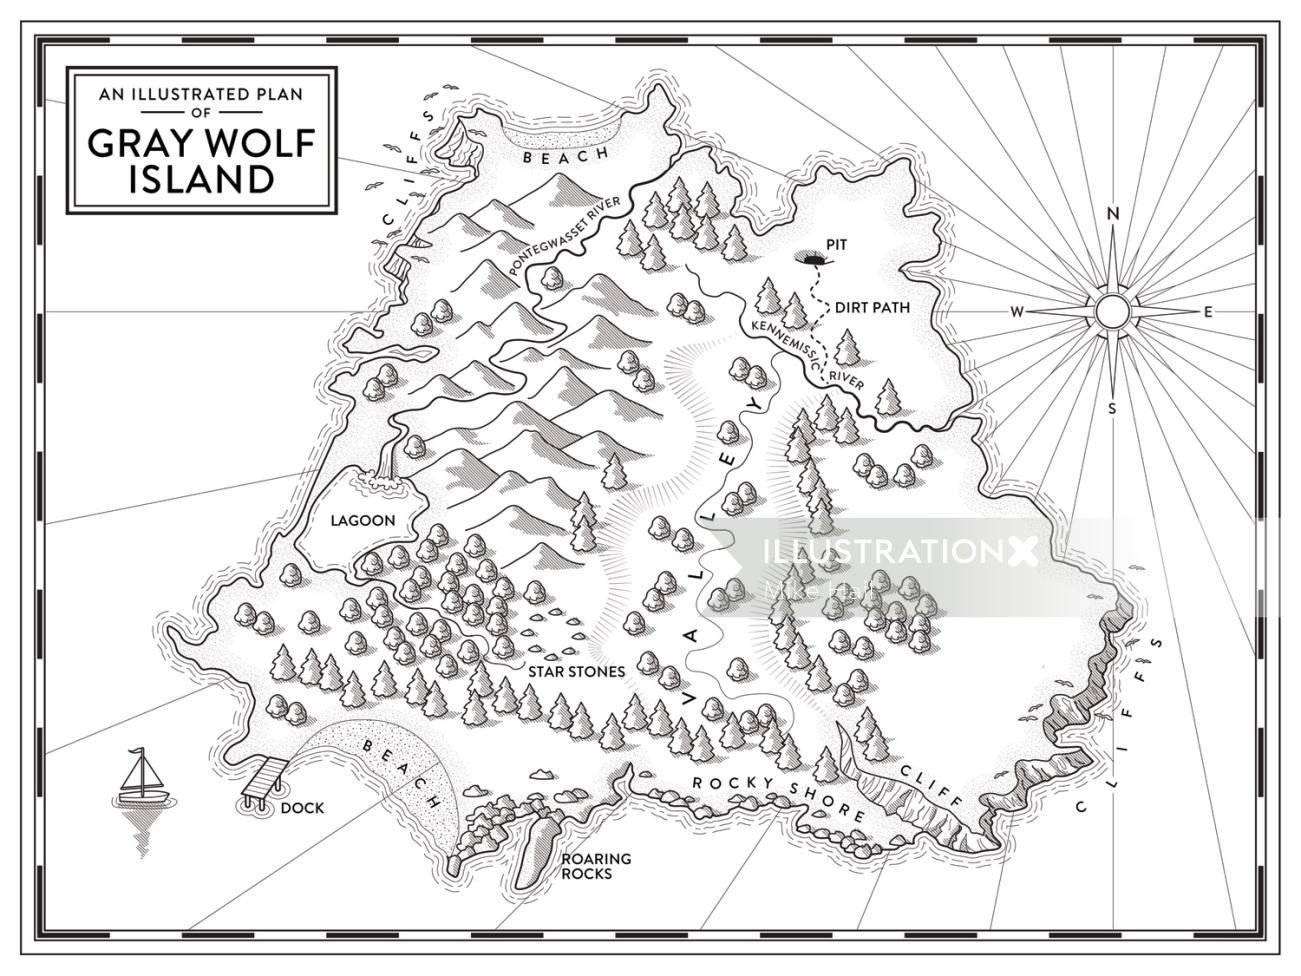 Island imaginary map by Mike Hall